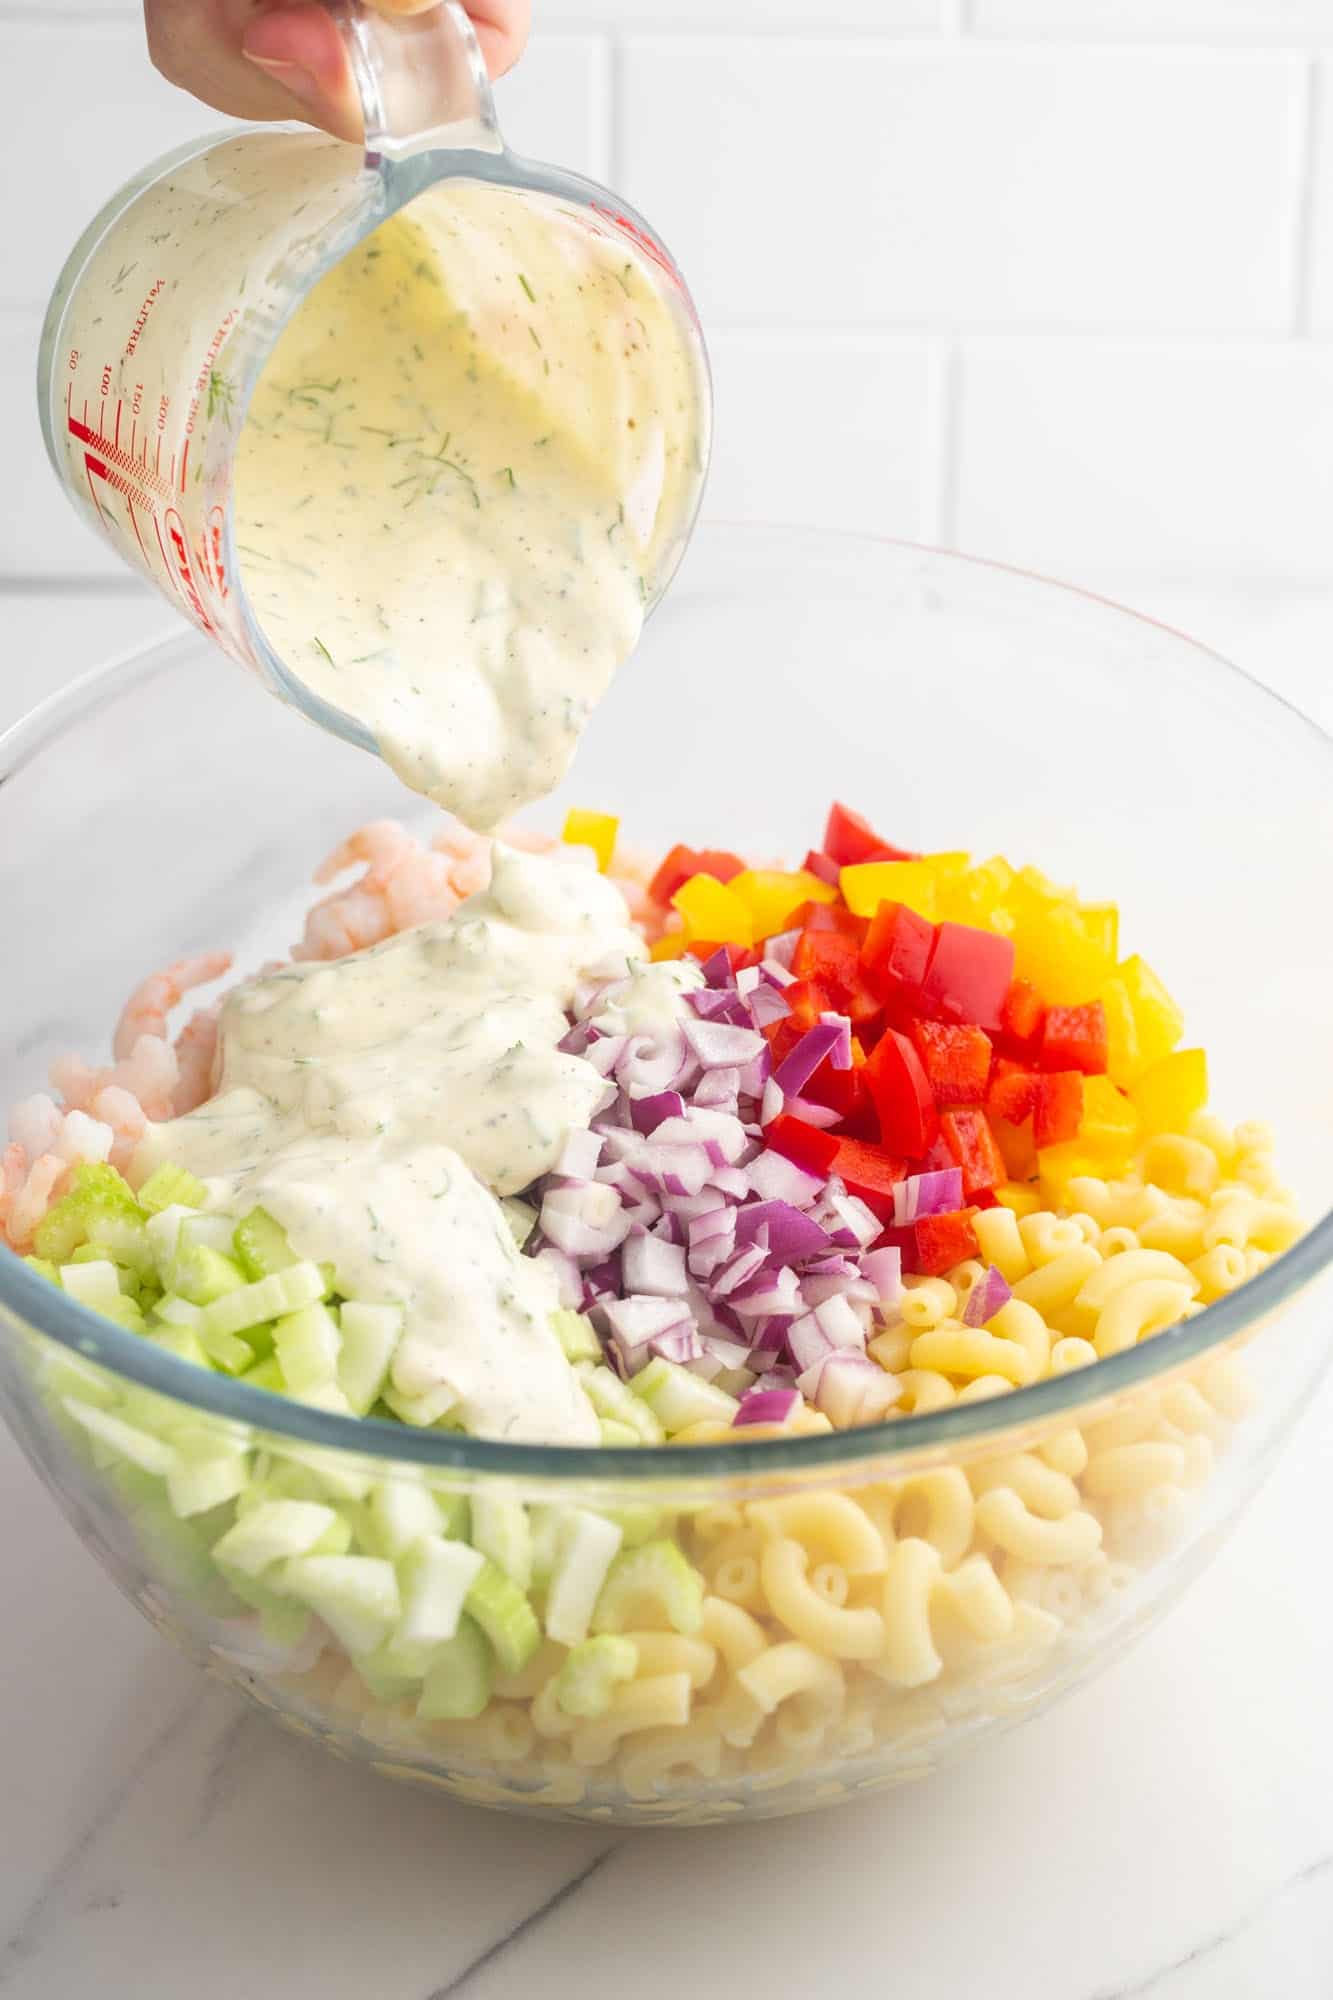 creamy dill dressing being poured over the rest of the shrimp salad ingredients